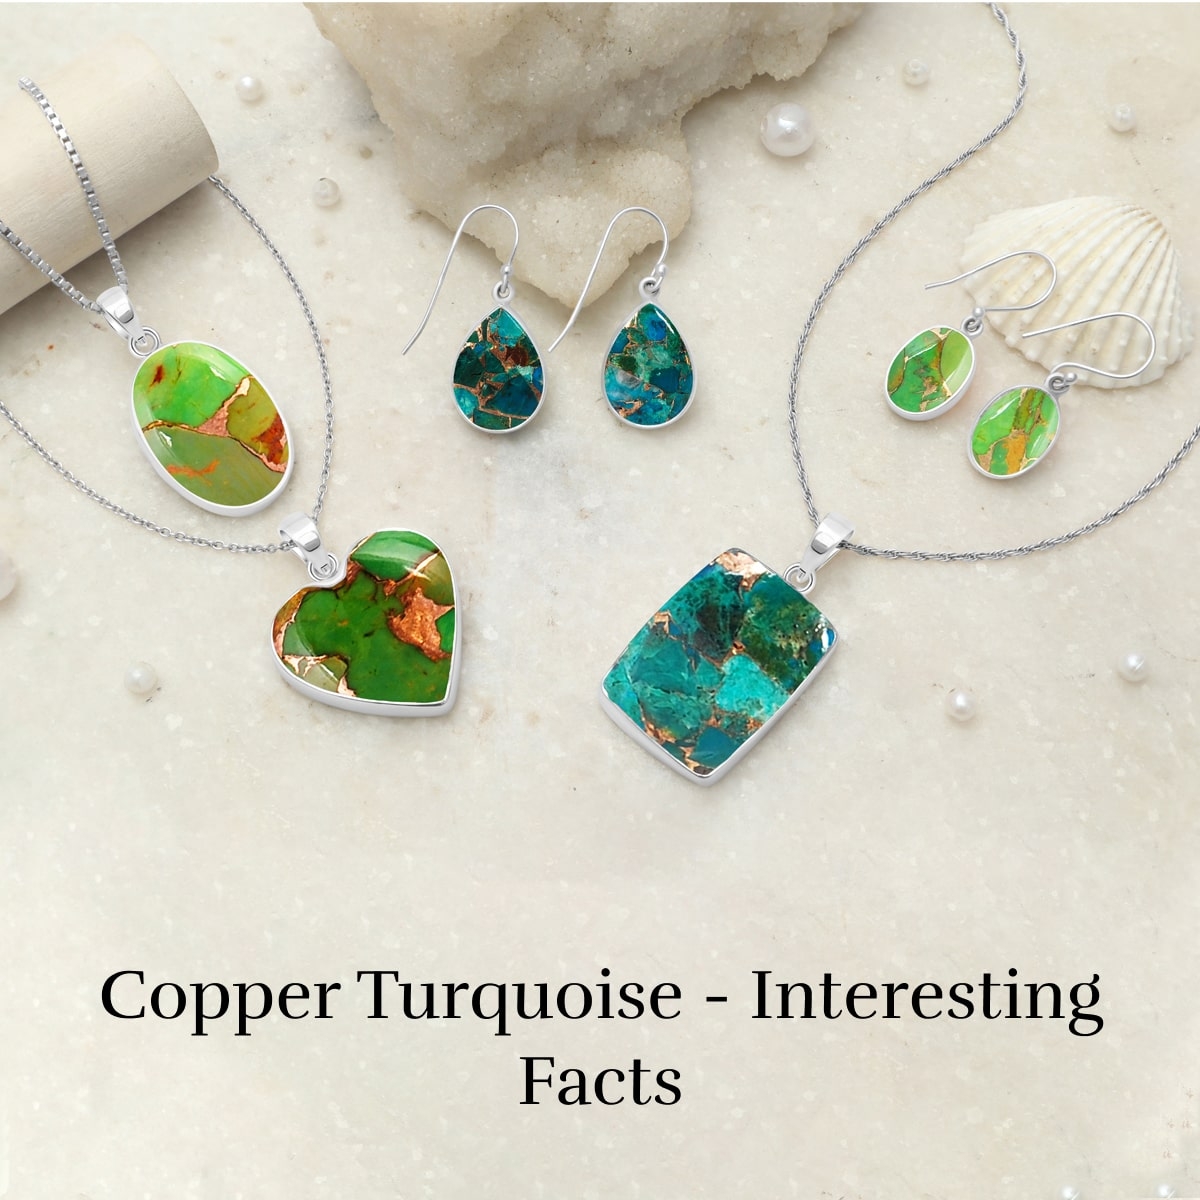 Facts About Copper Turquoise